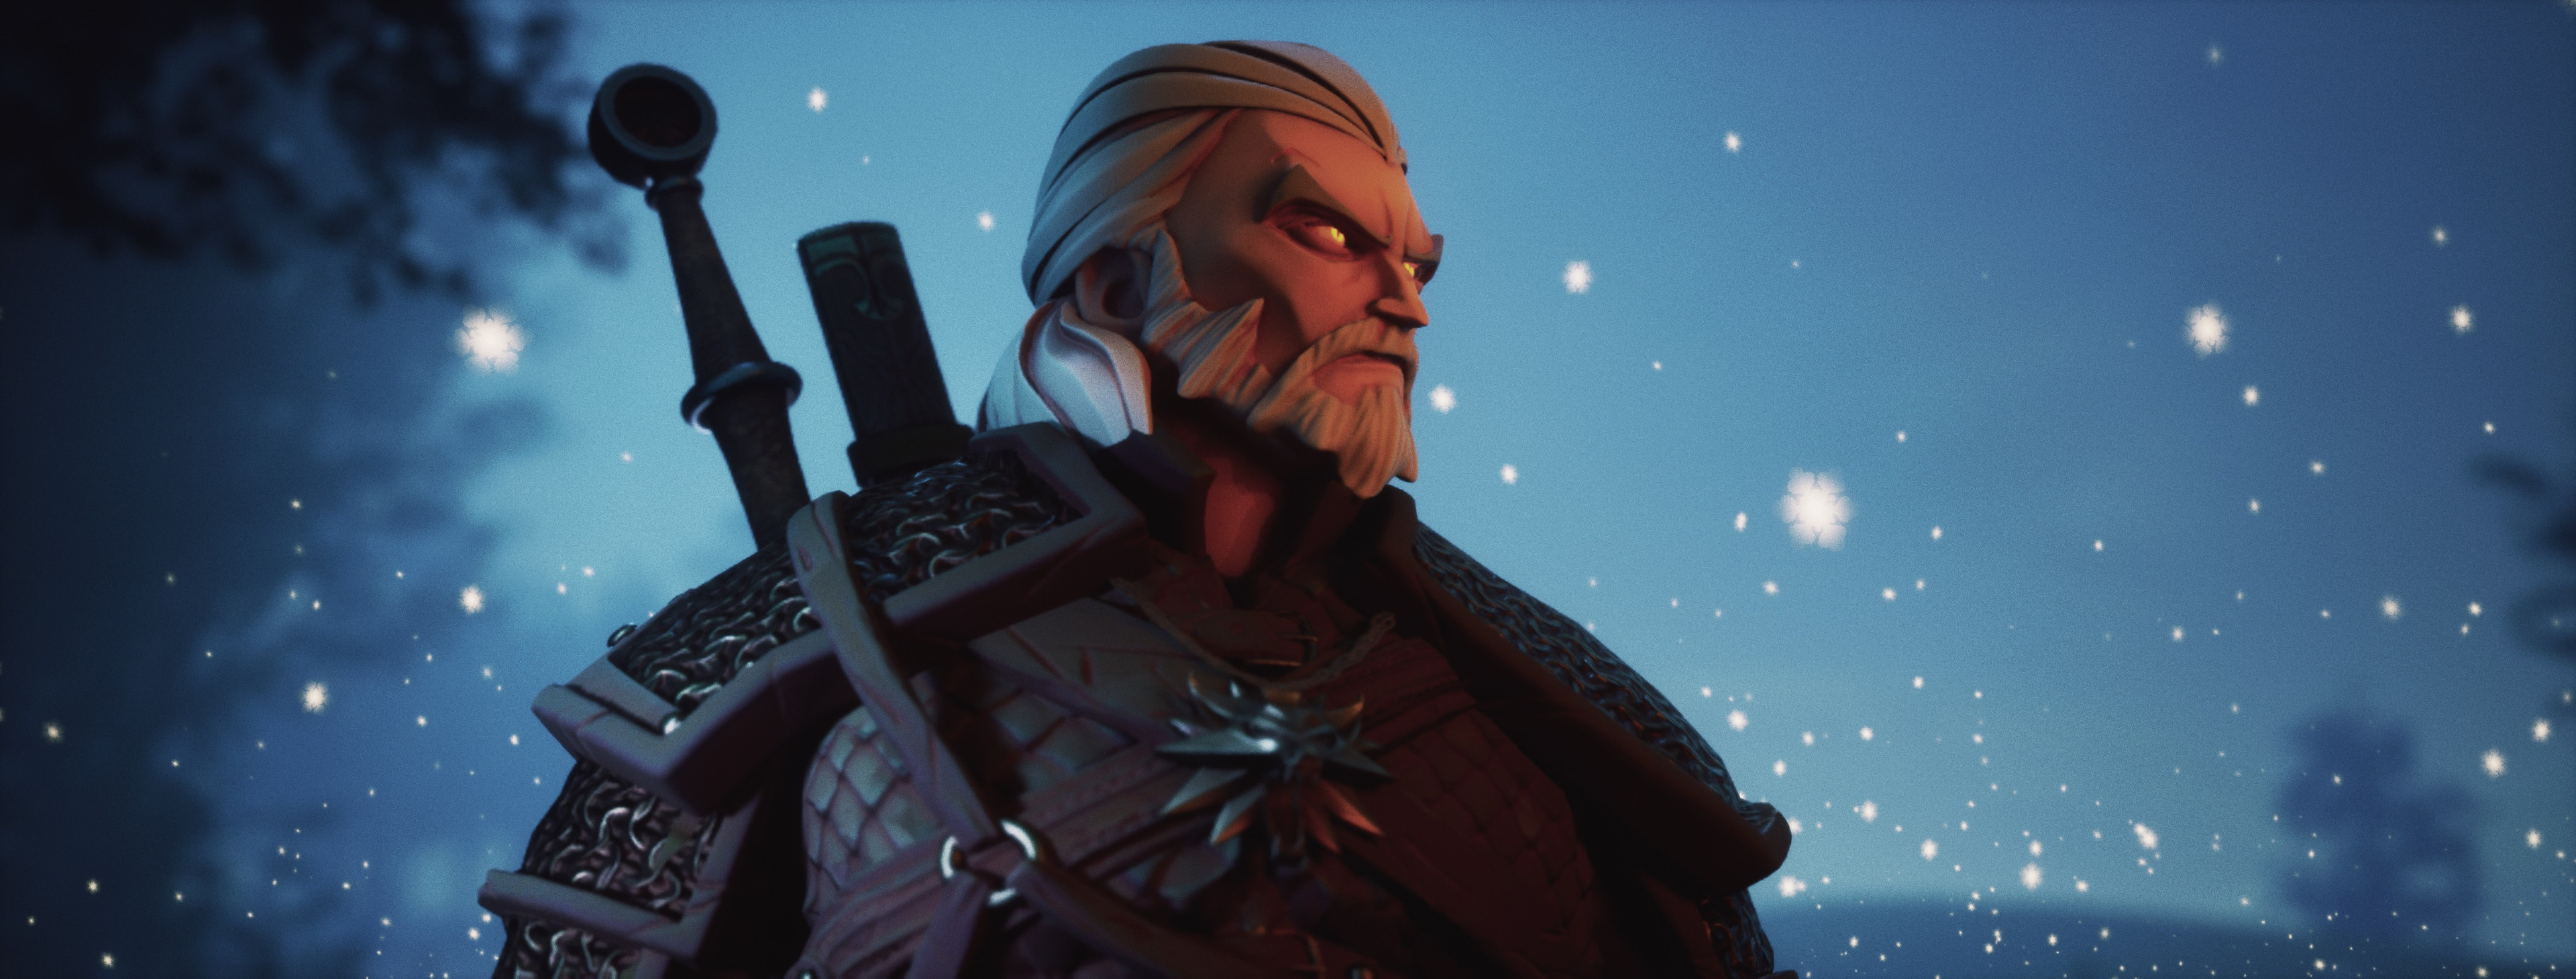 Michele Marchionni Snow Ultrawide Snowflakes The Witcher 3 Digital Art The Witcher Fan Art Sword Ger 3840x1460